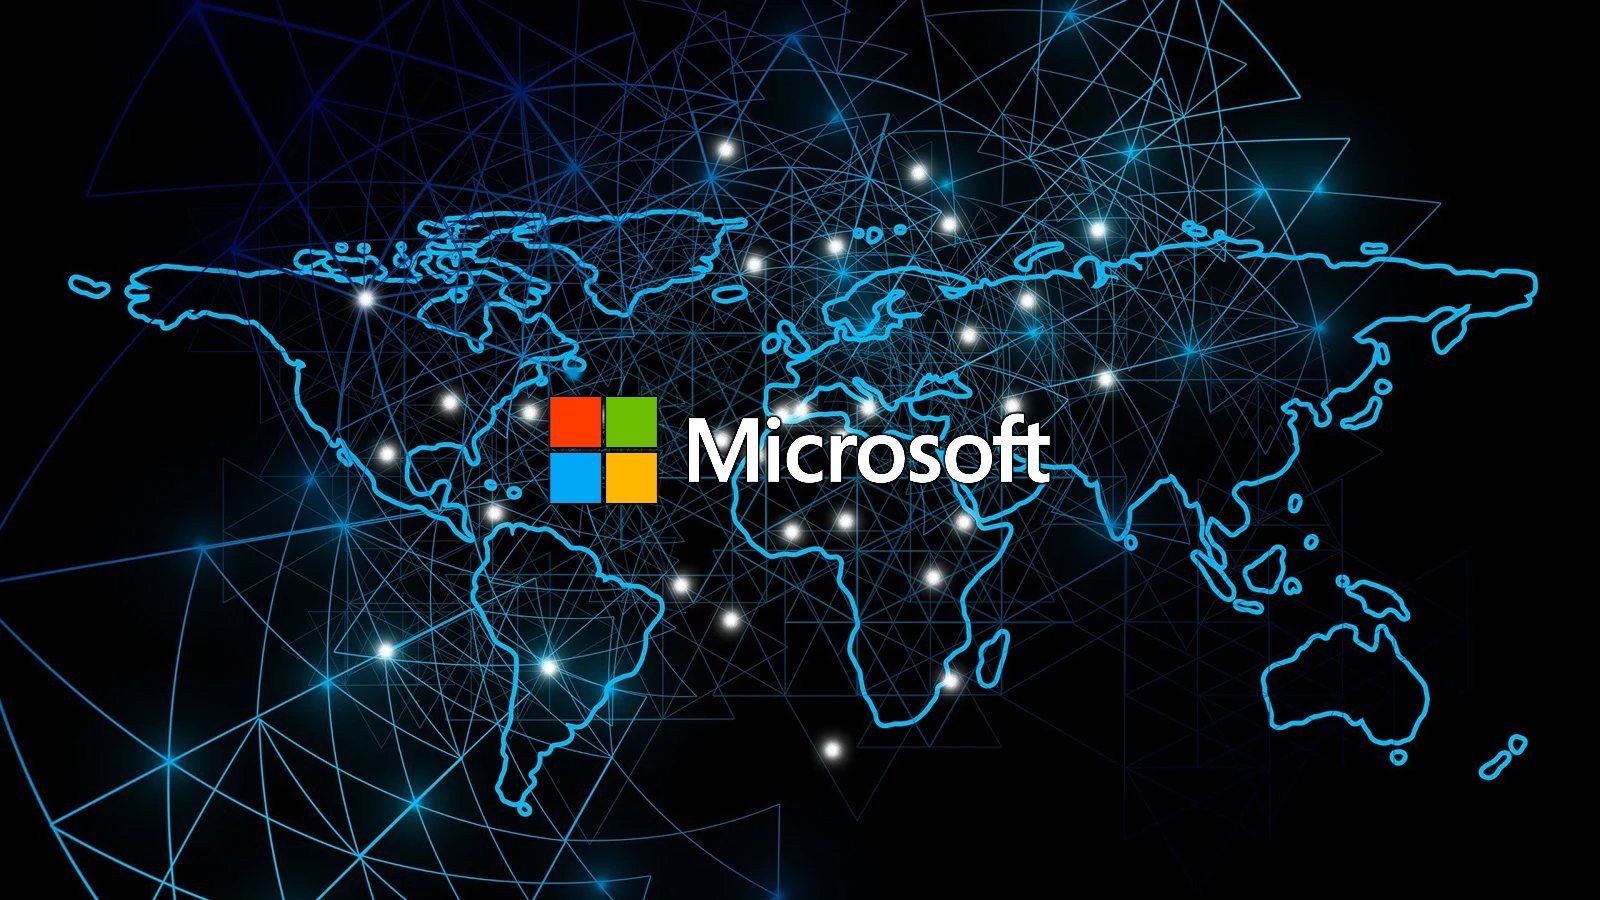 Microsoft says hackers used vulnerabilities in Boa web server, discontinued in 2005 but pervasive across IoT devices, to target the Indian power sector